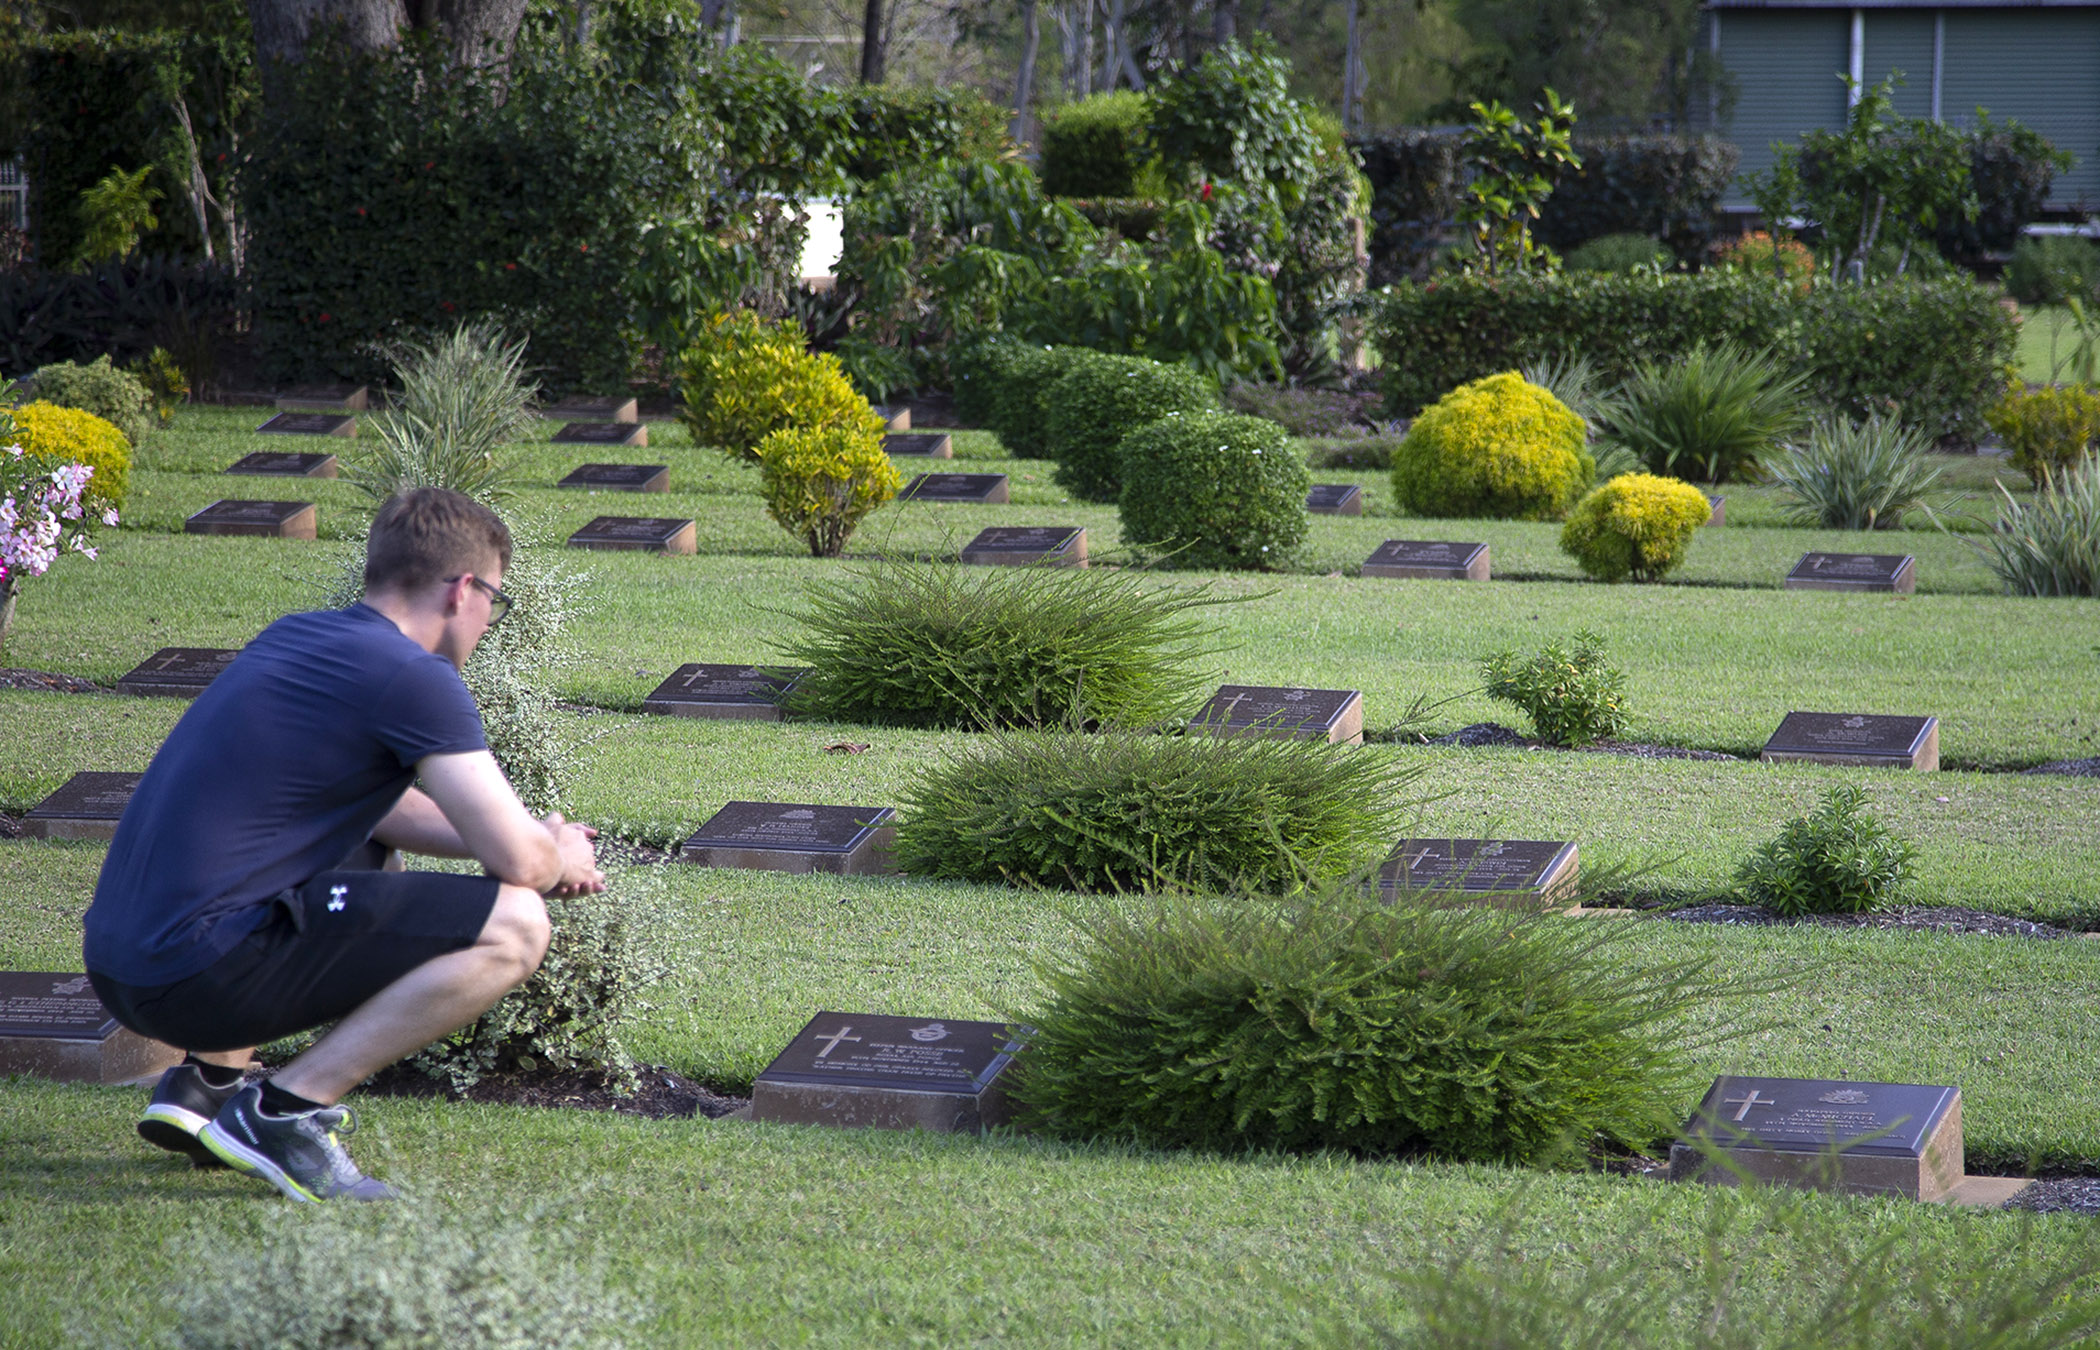 Image shows onlooker crouching by headstones in a cemetery/